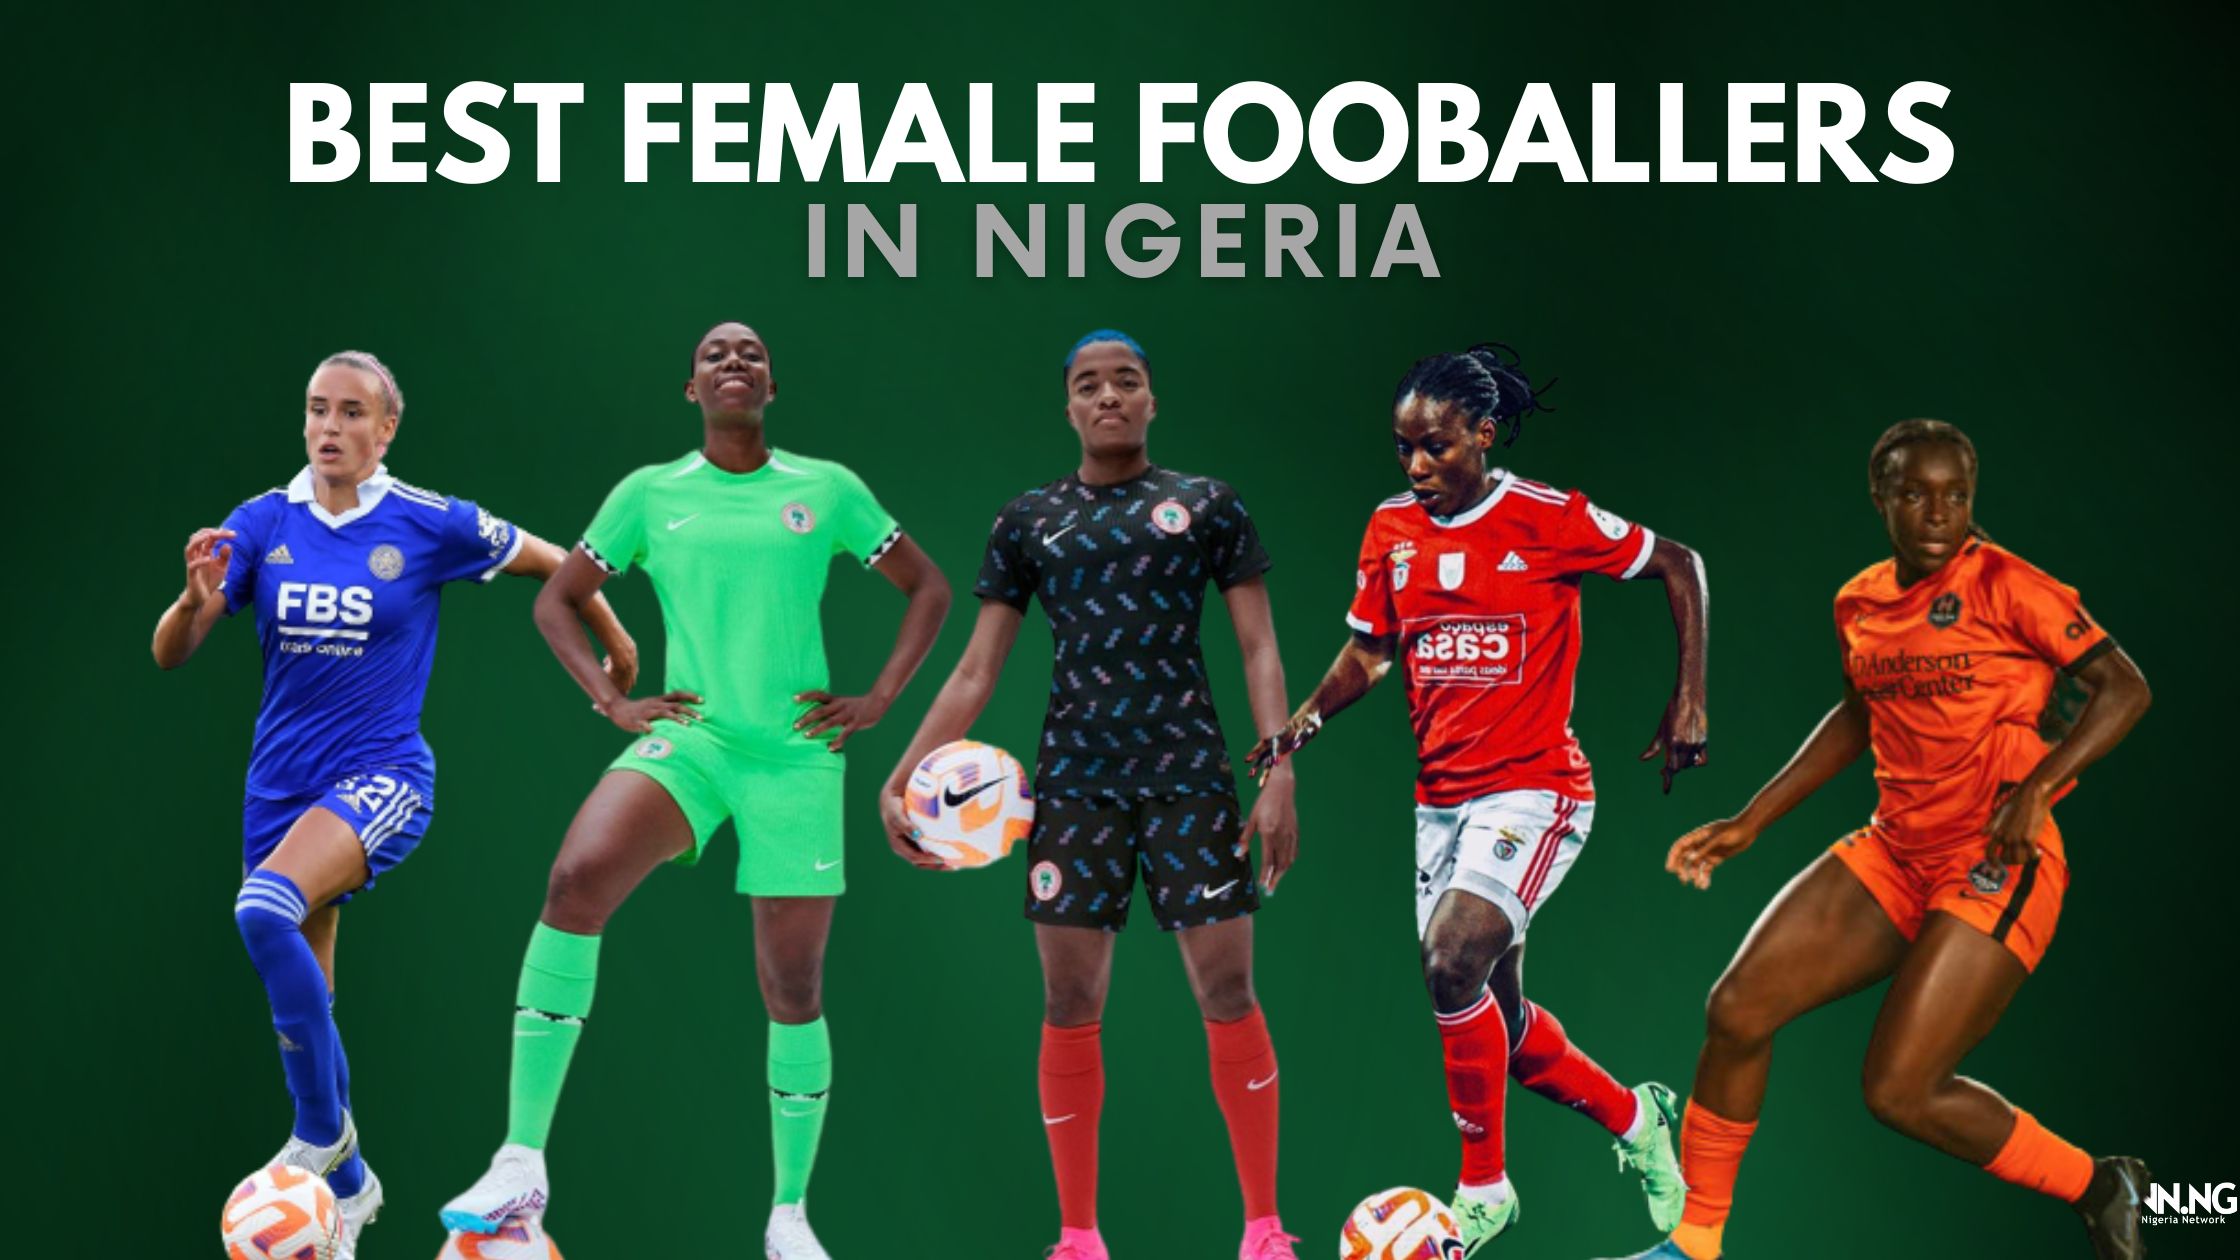 The Best Performing Female Footballers in Nigeria at the 2023 FIFA Women's World Cup.